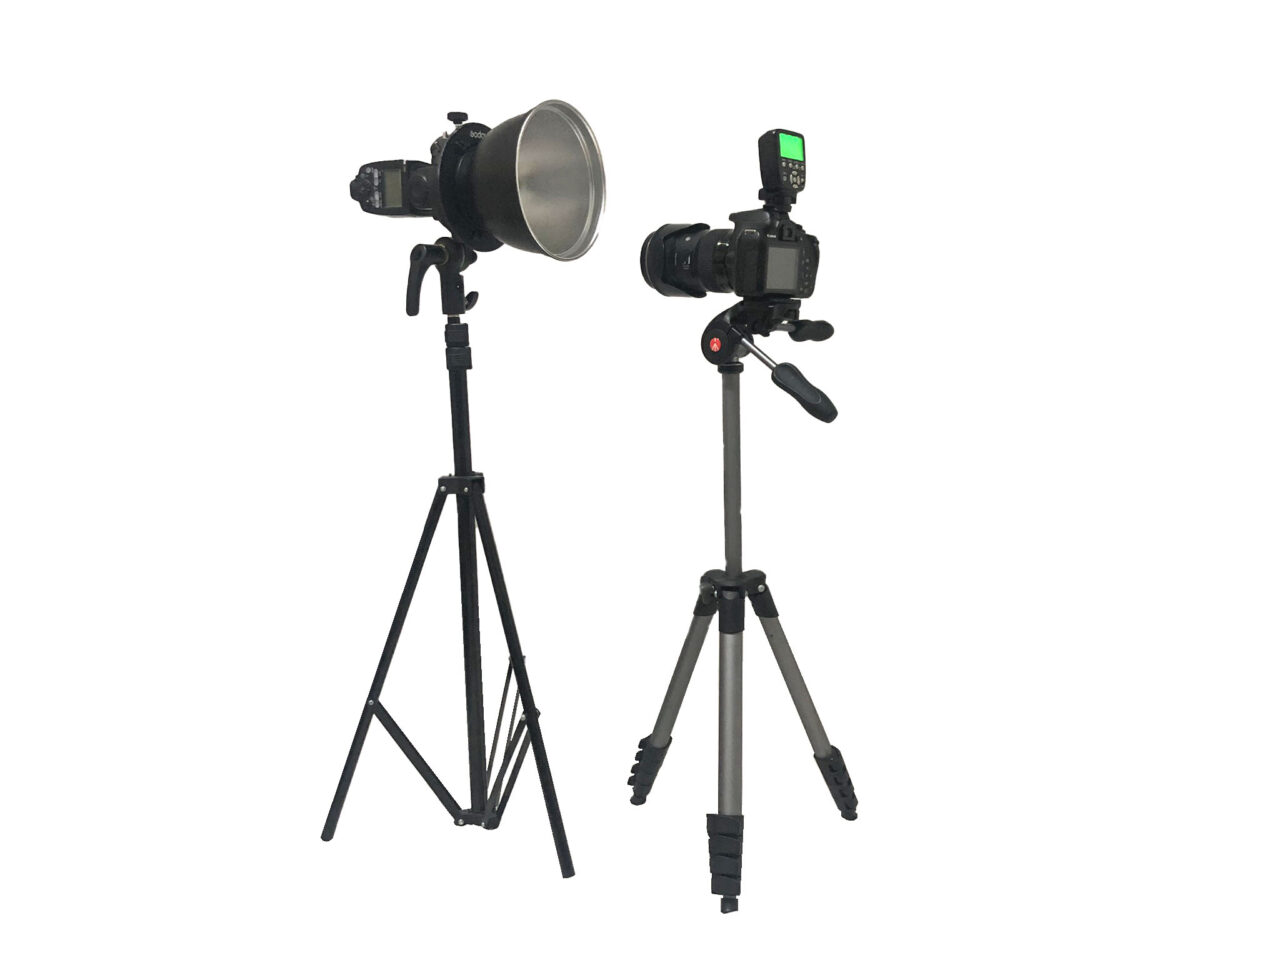 Speedlite with a 7-inch reflector on a stand and a camera on a tripod on a white background